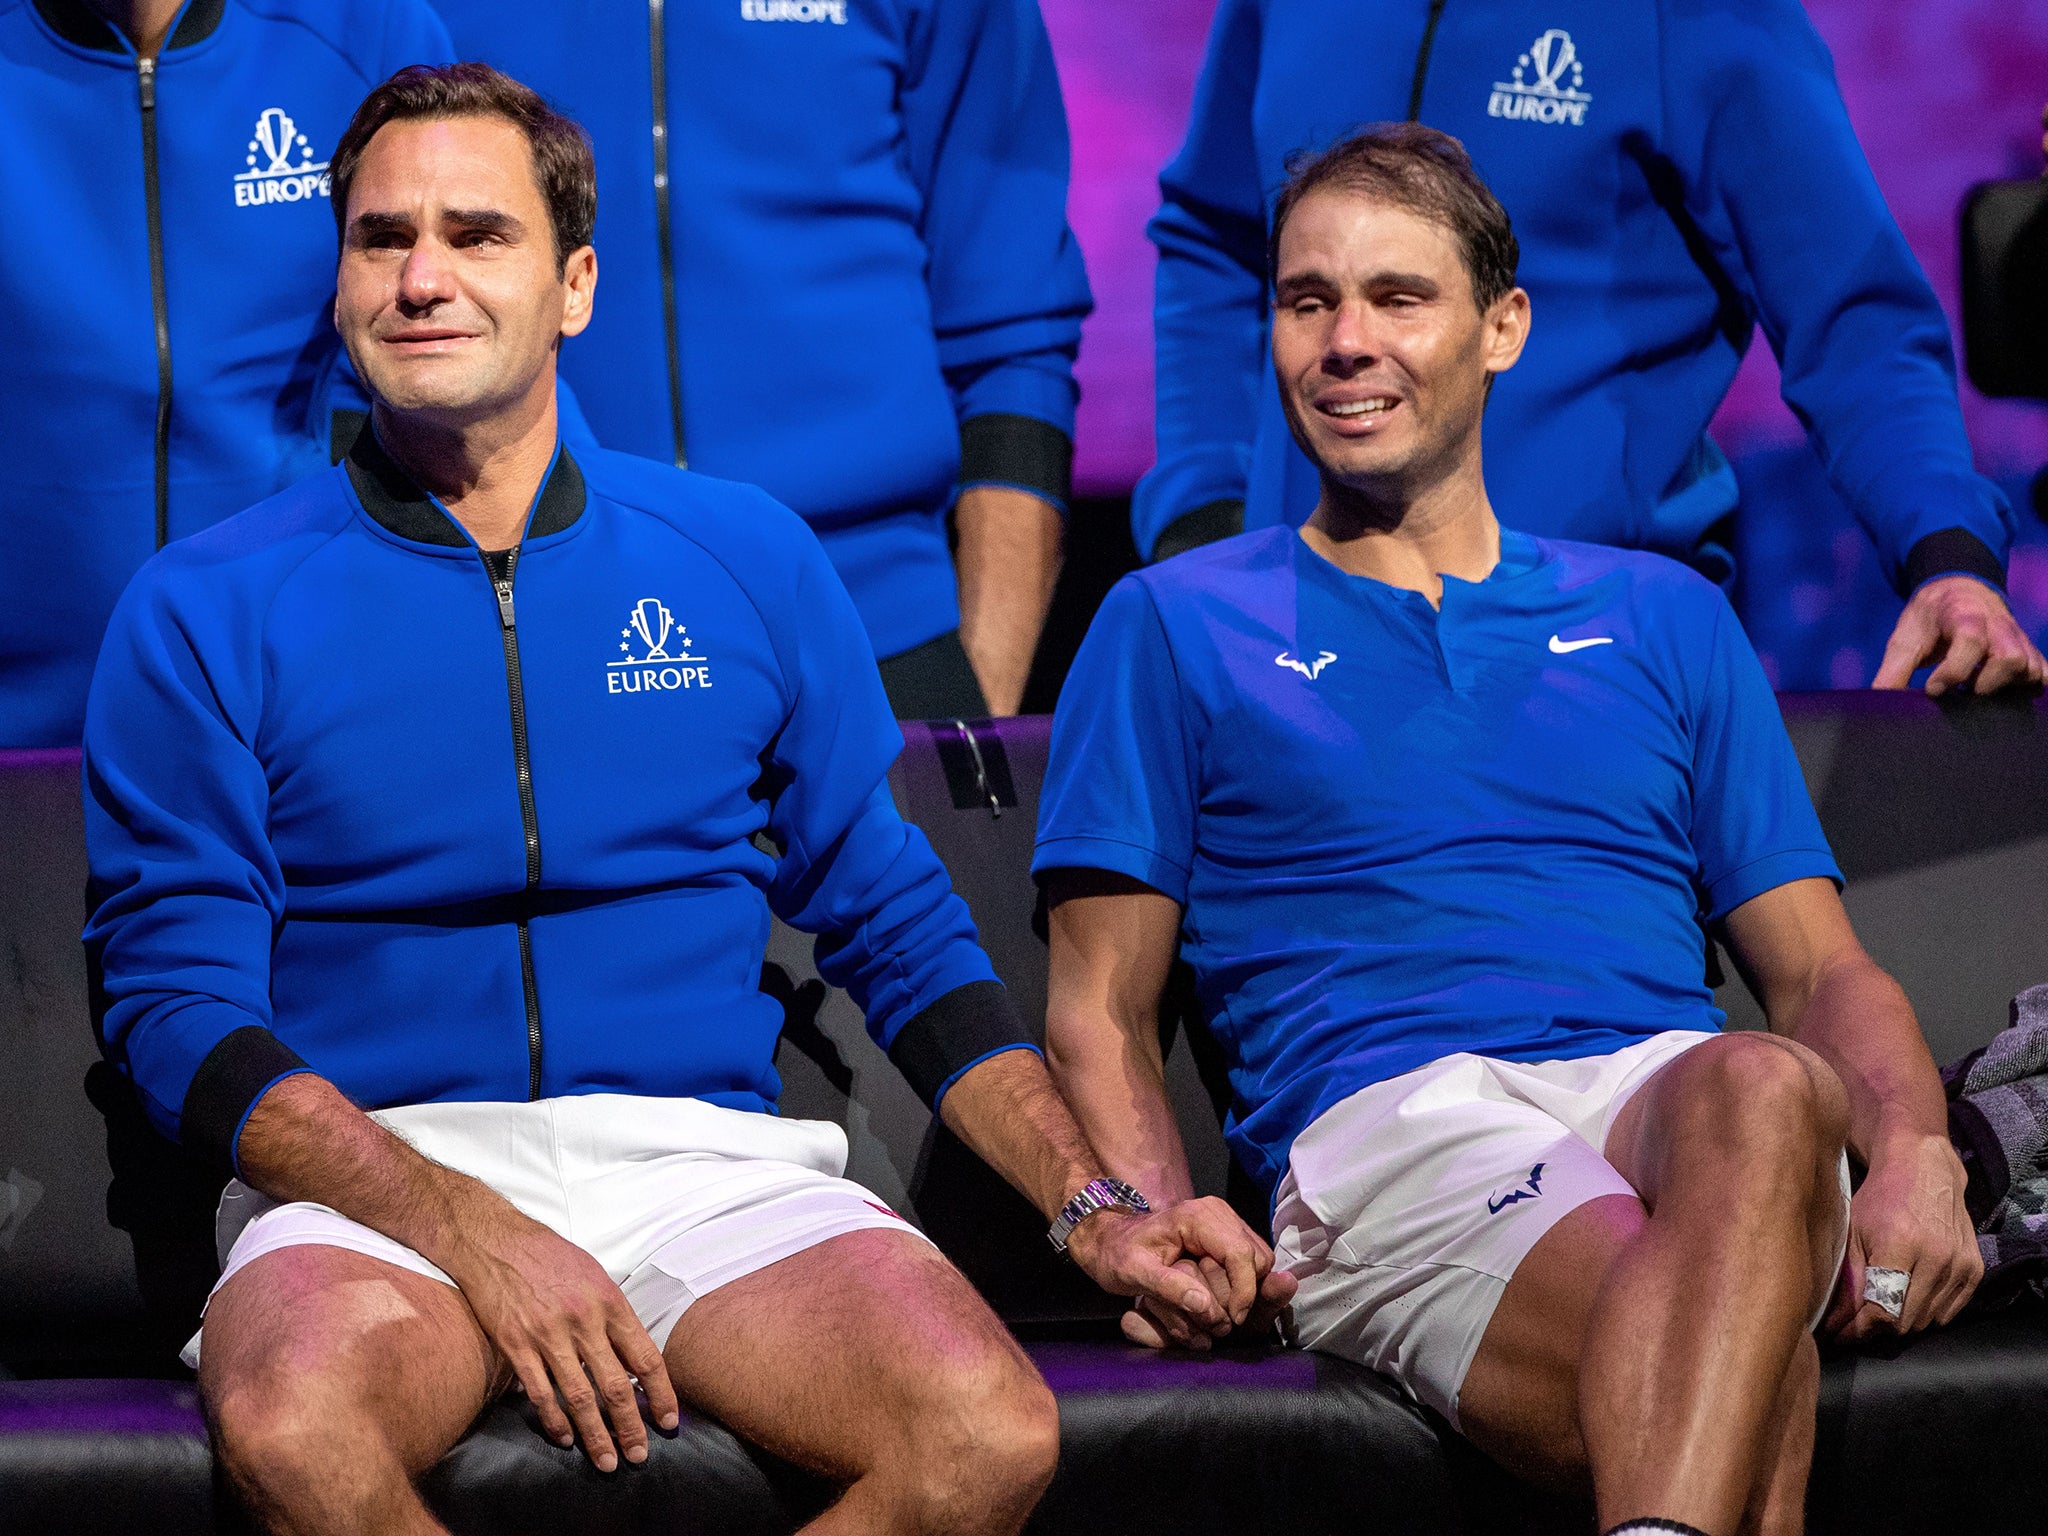 Roger Federer and Rafael Nadal friendship Why dont more British men hold hands? The Independent